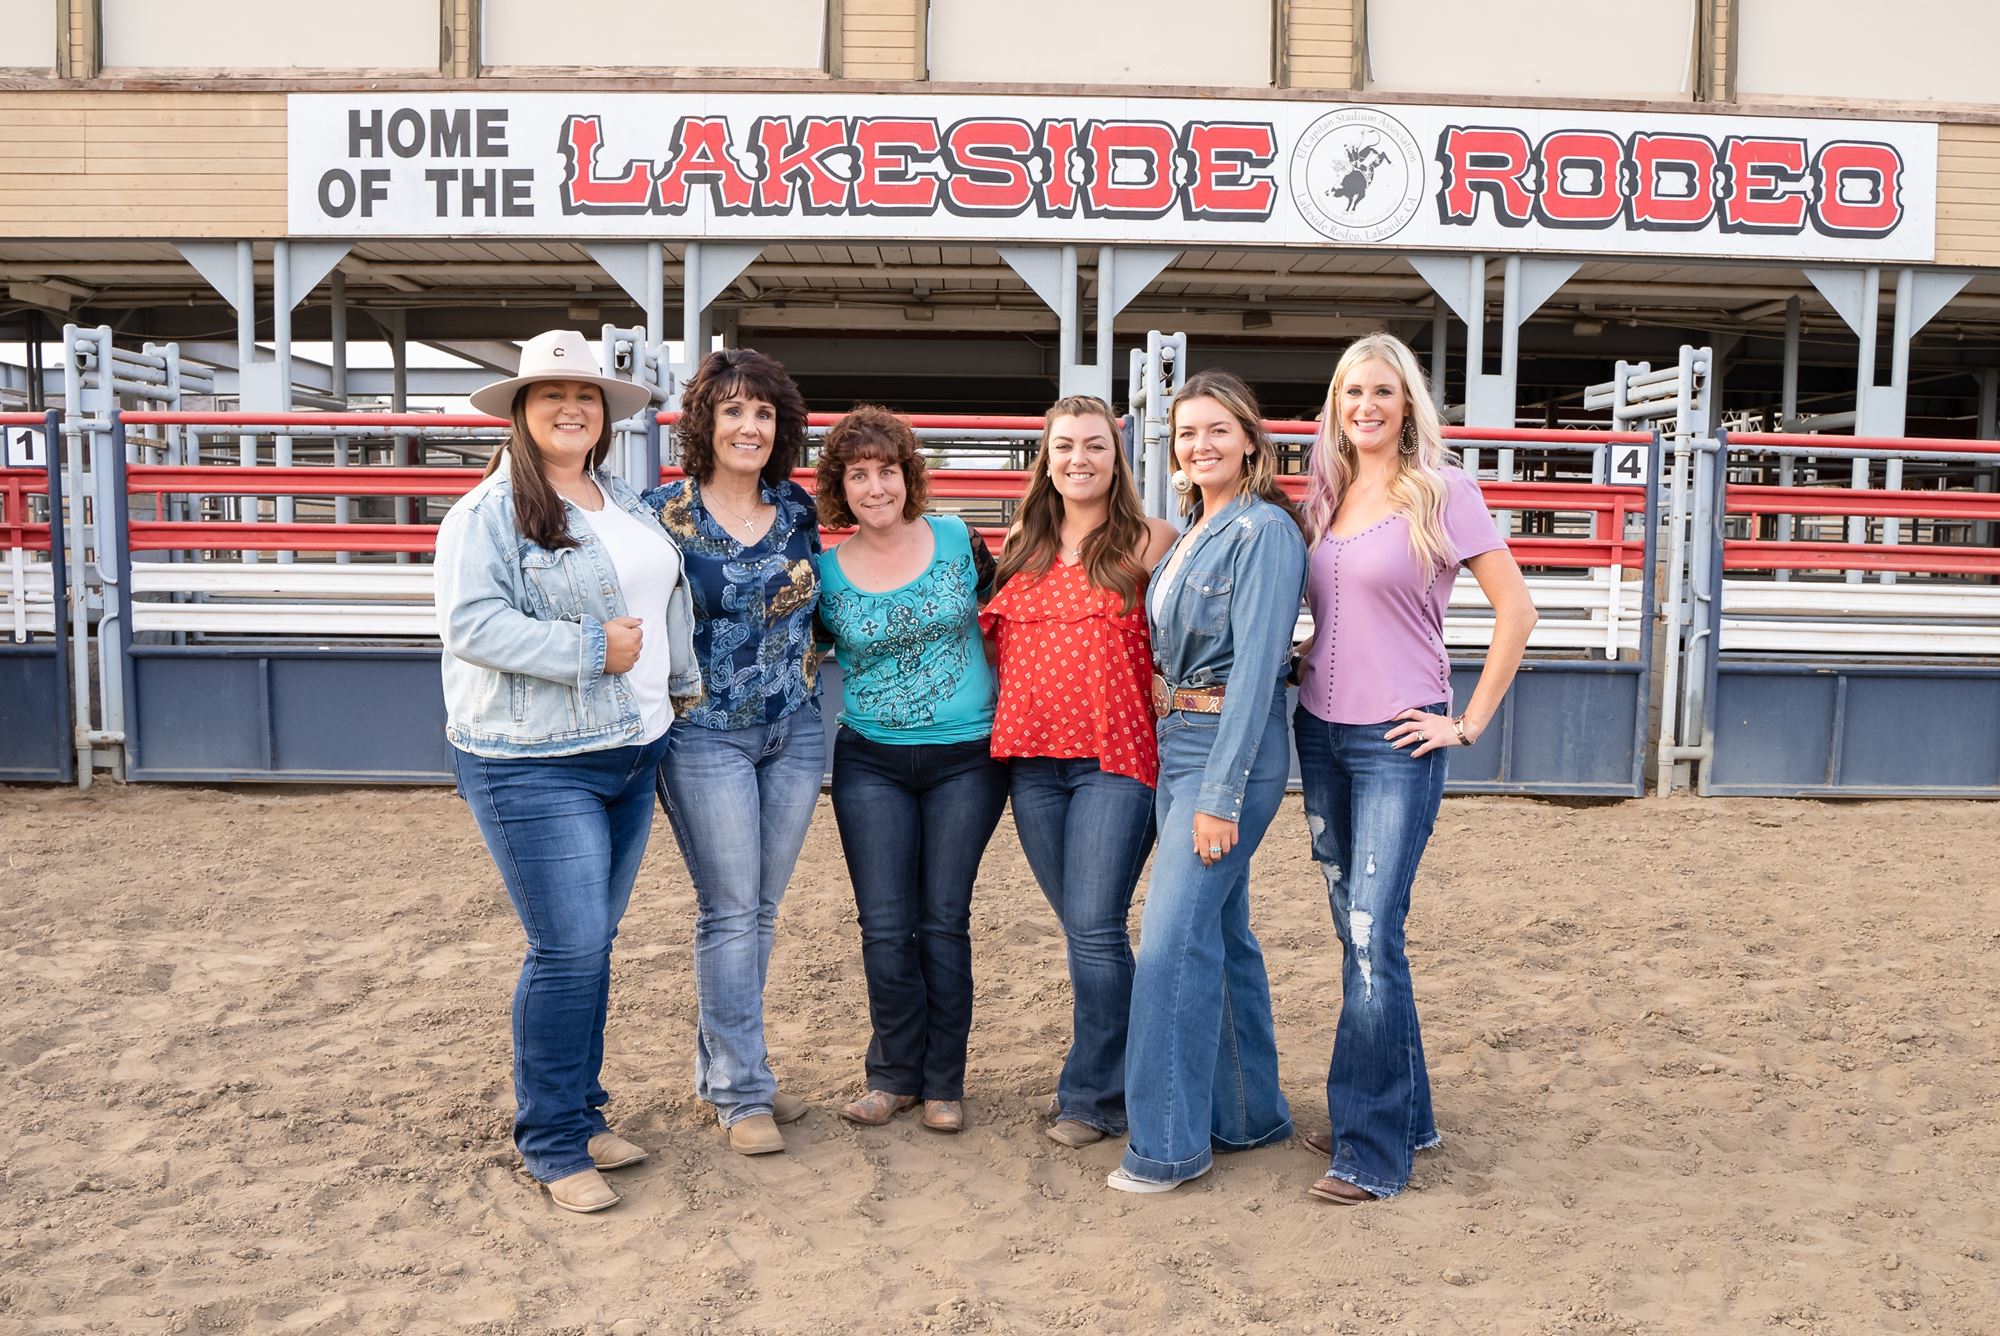 Lakeside Rodeo Queens and Lakeside Rodeo Tickets